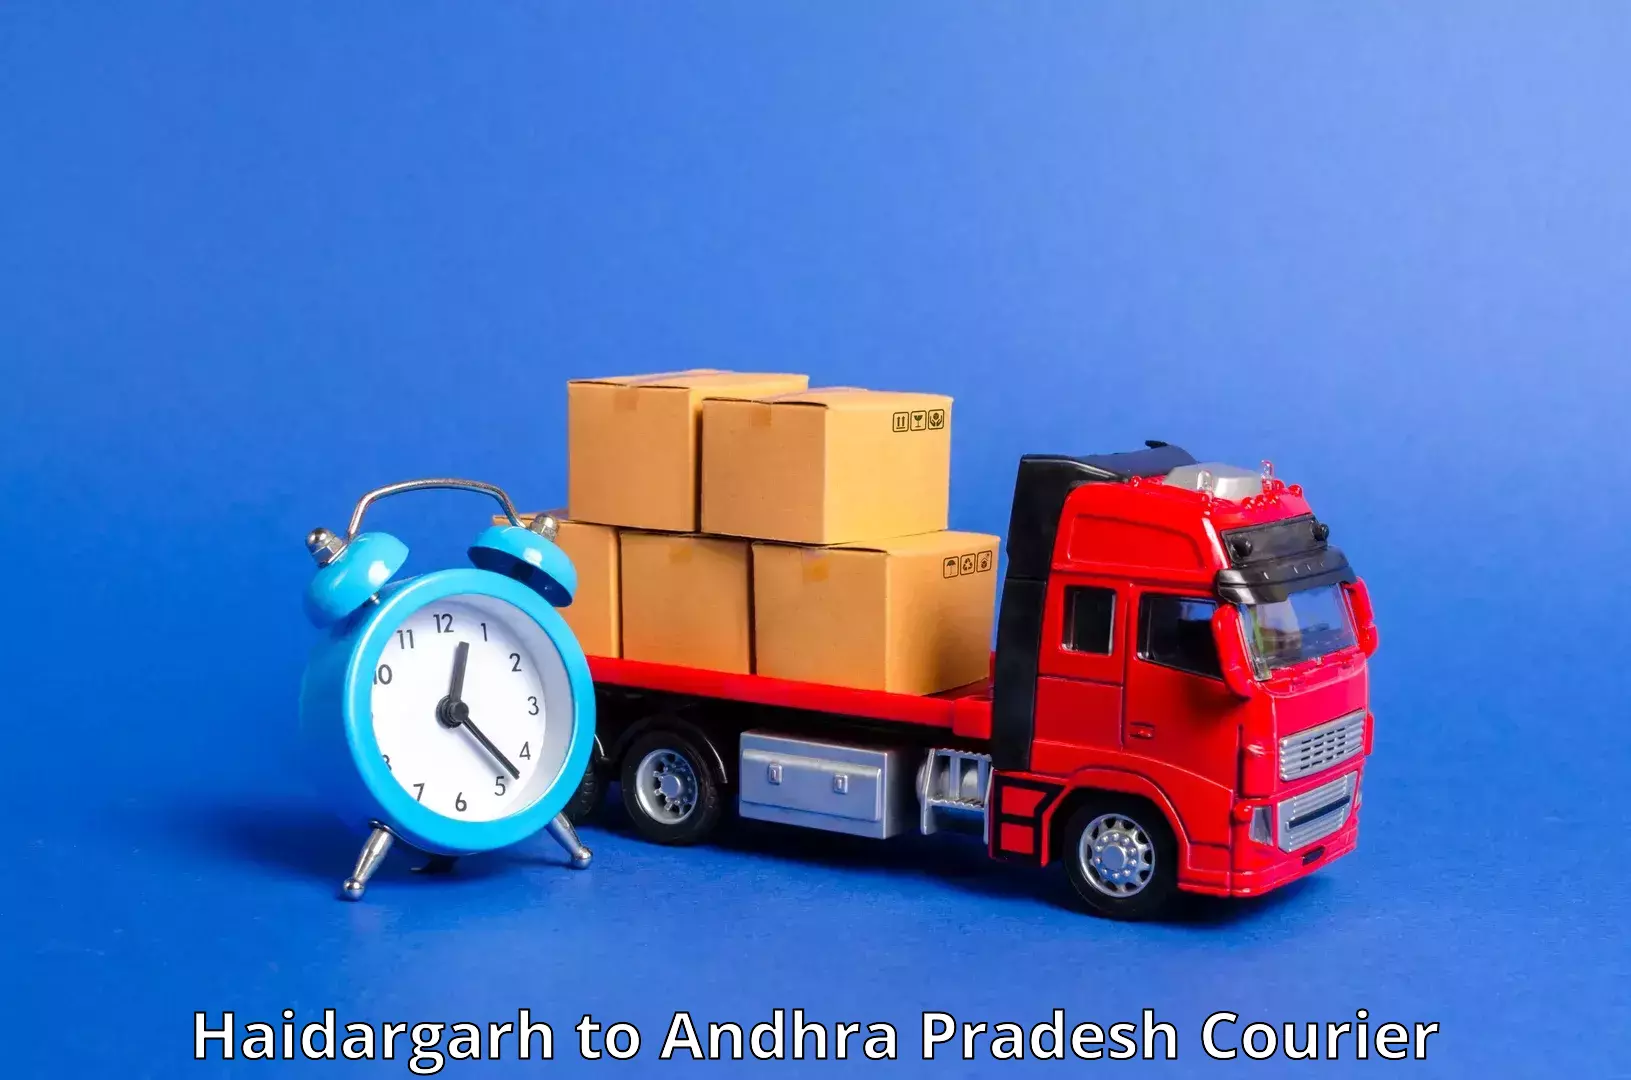 Residential courier service Haidargarh to Dhone